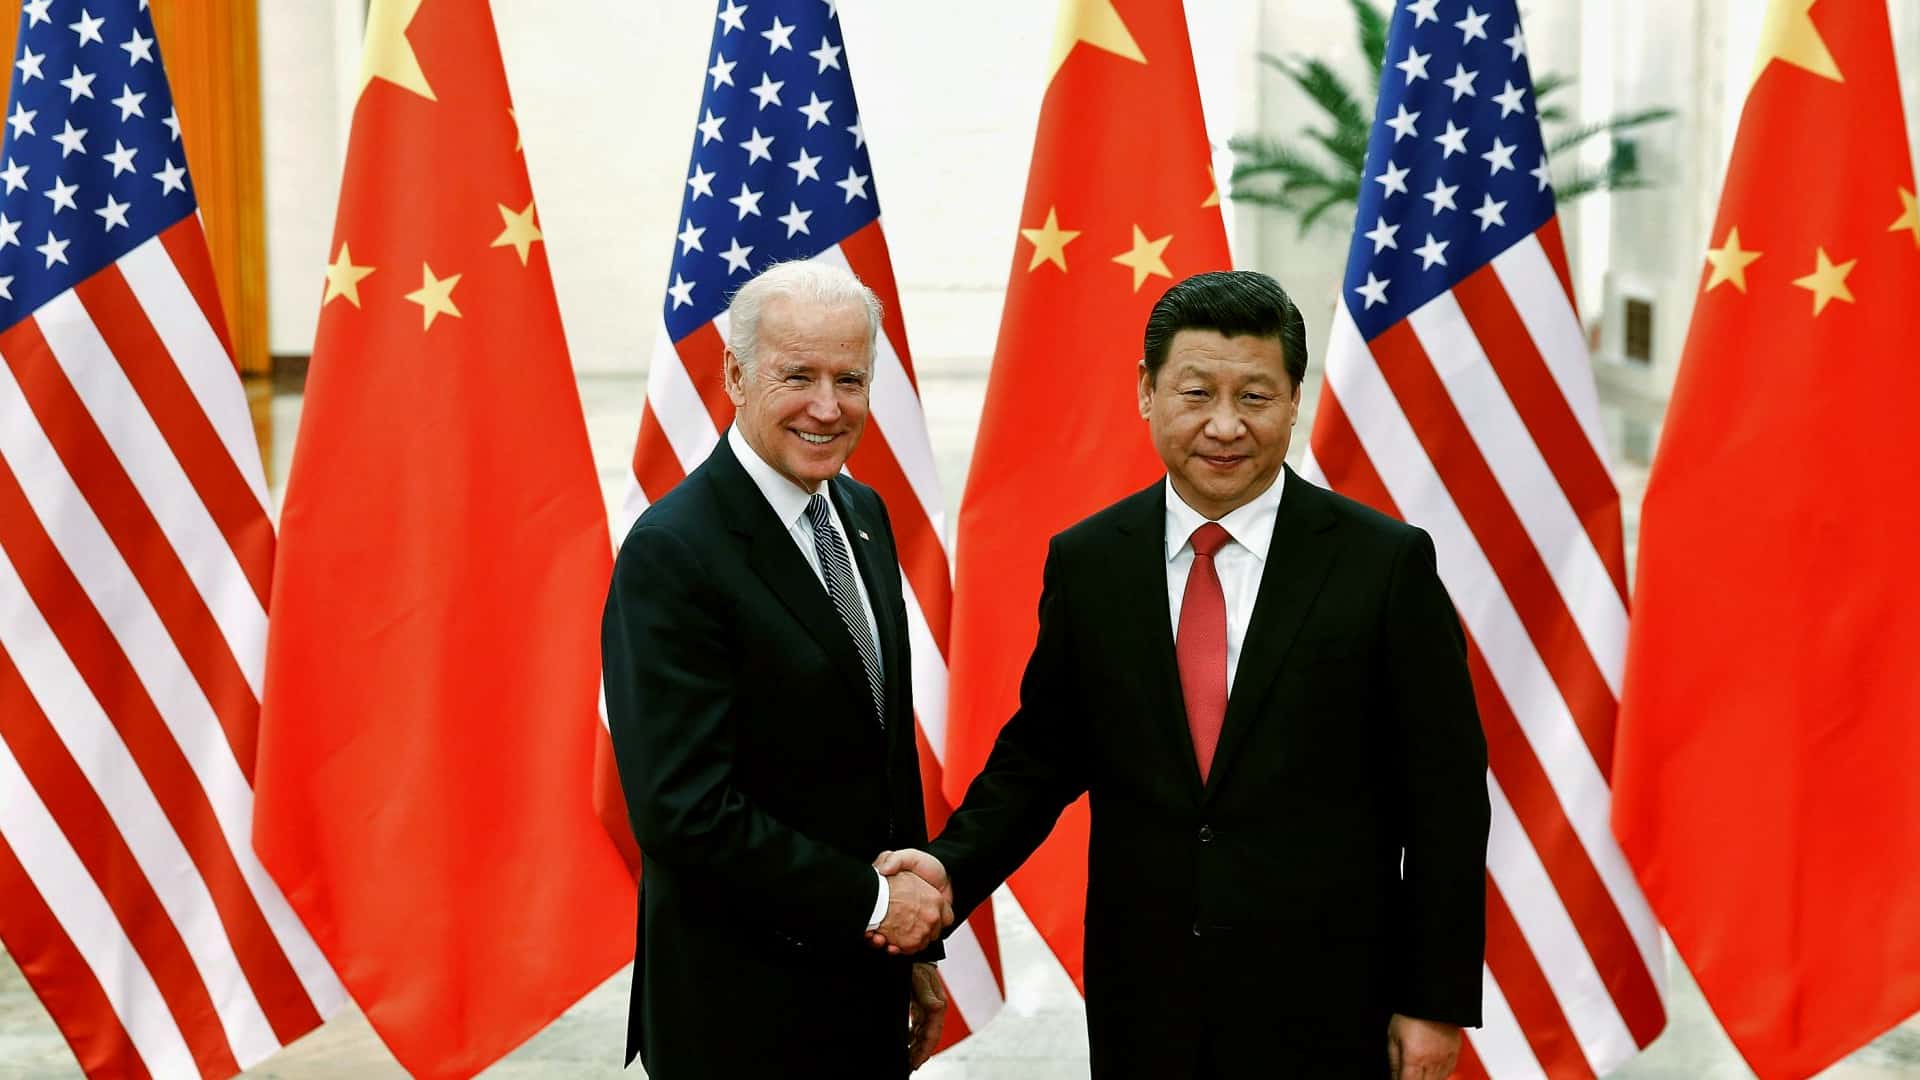 2021 Top Risks: The Prolonged Impact of COVID-19 and Readjustment of US-China Relations Continue to Bring Unpredictability for Businesses in India